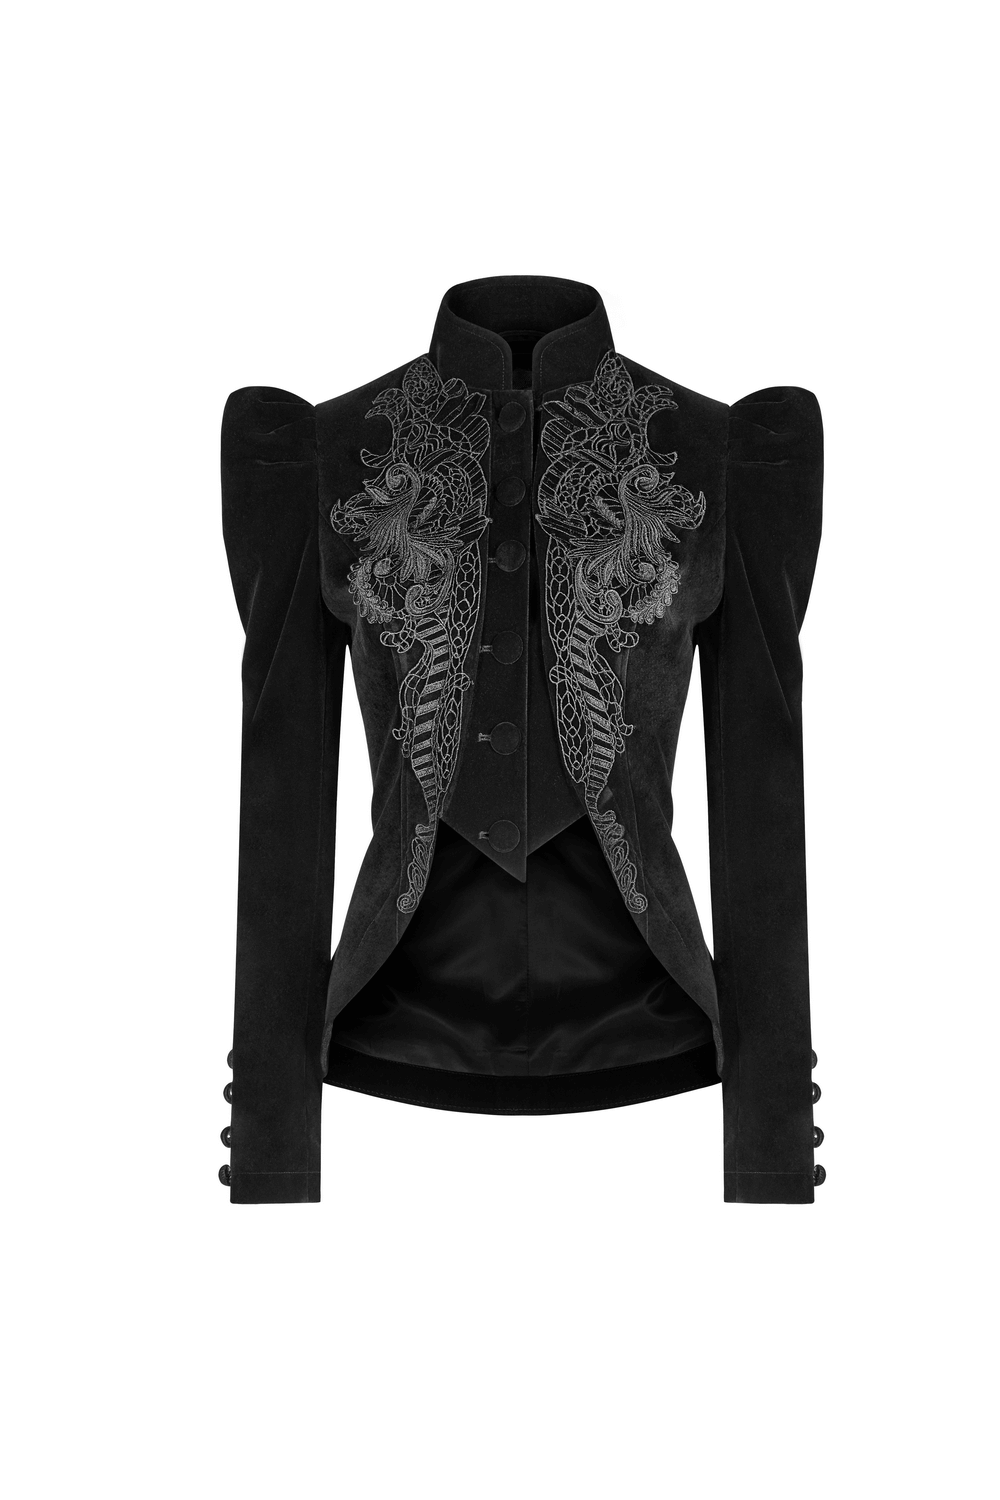 Chic Gothic Weft Velvet Tailcoat with Lace Trim - HARD'N'HEAVY